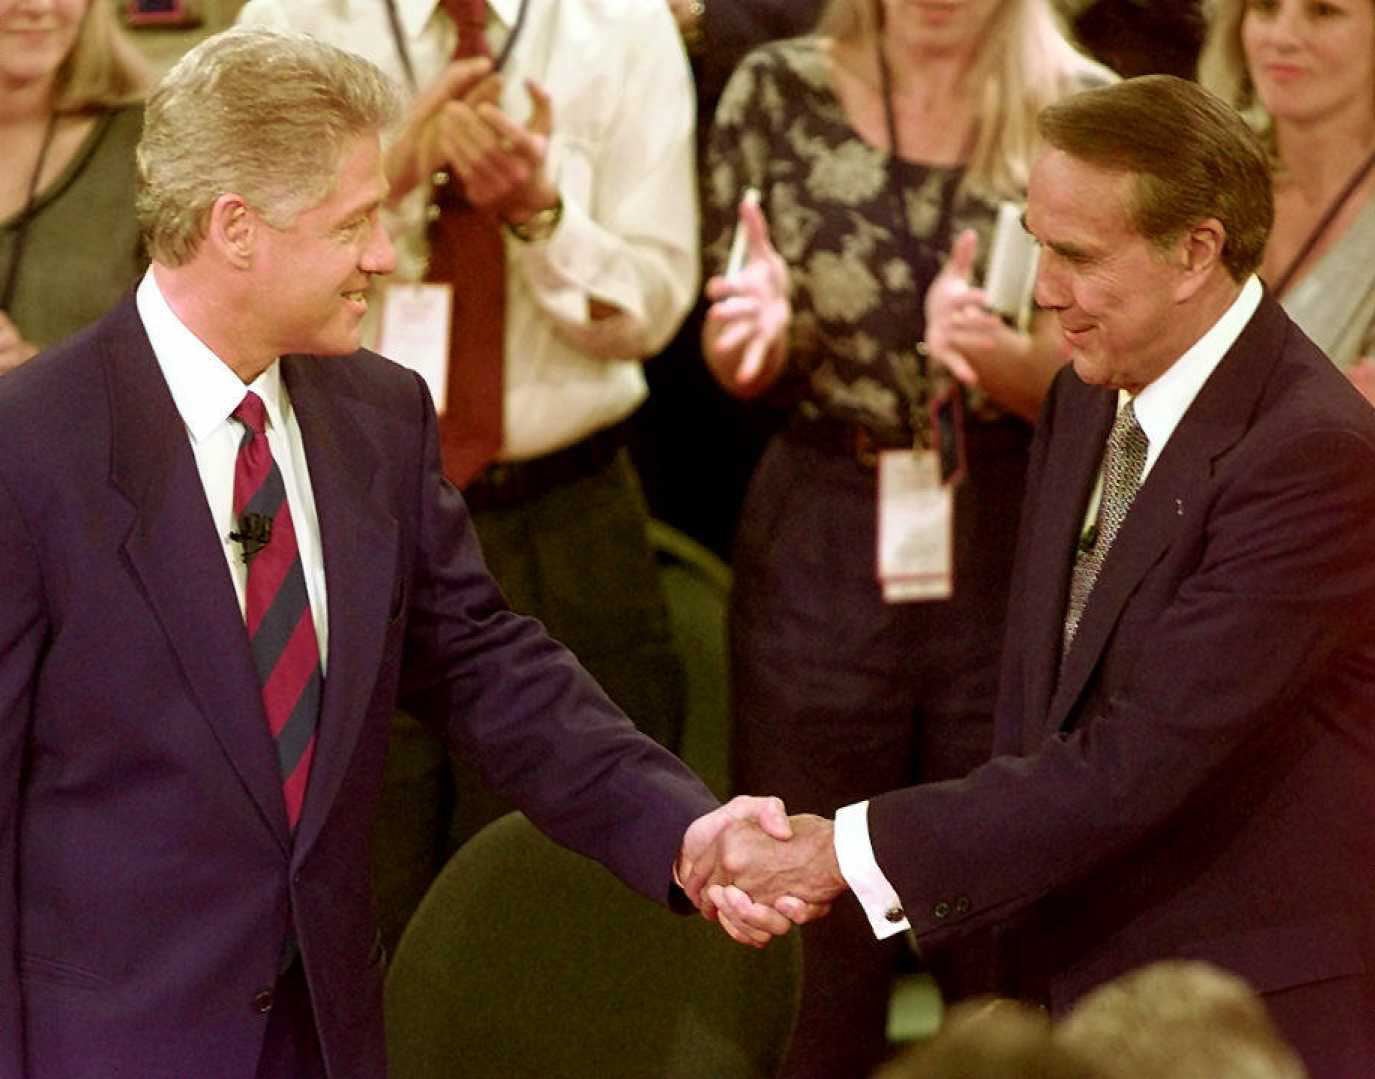 Dole established a warm rapport after the 1996 election with Clinton